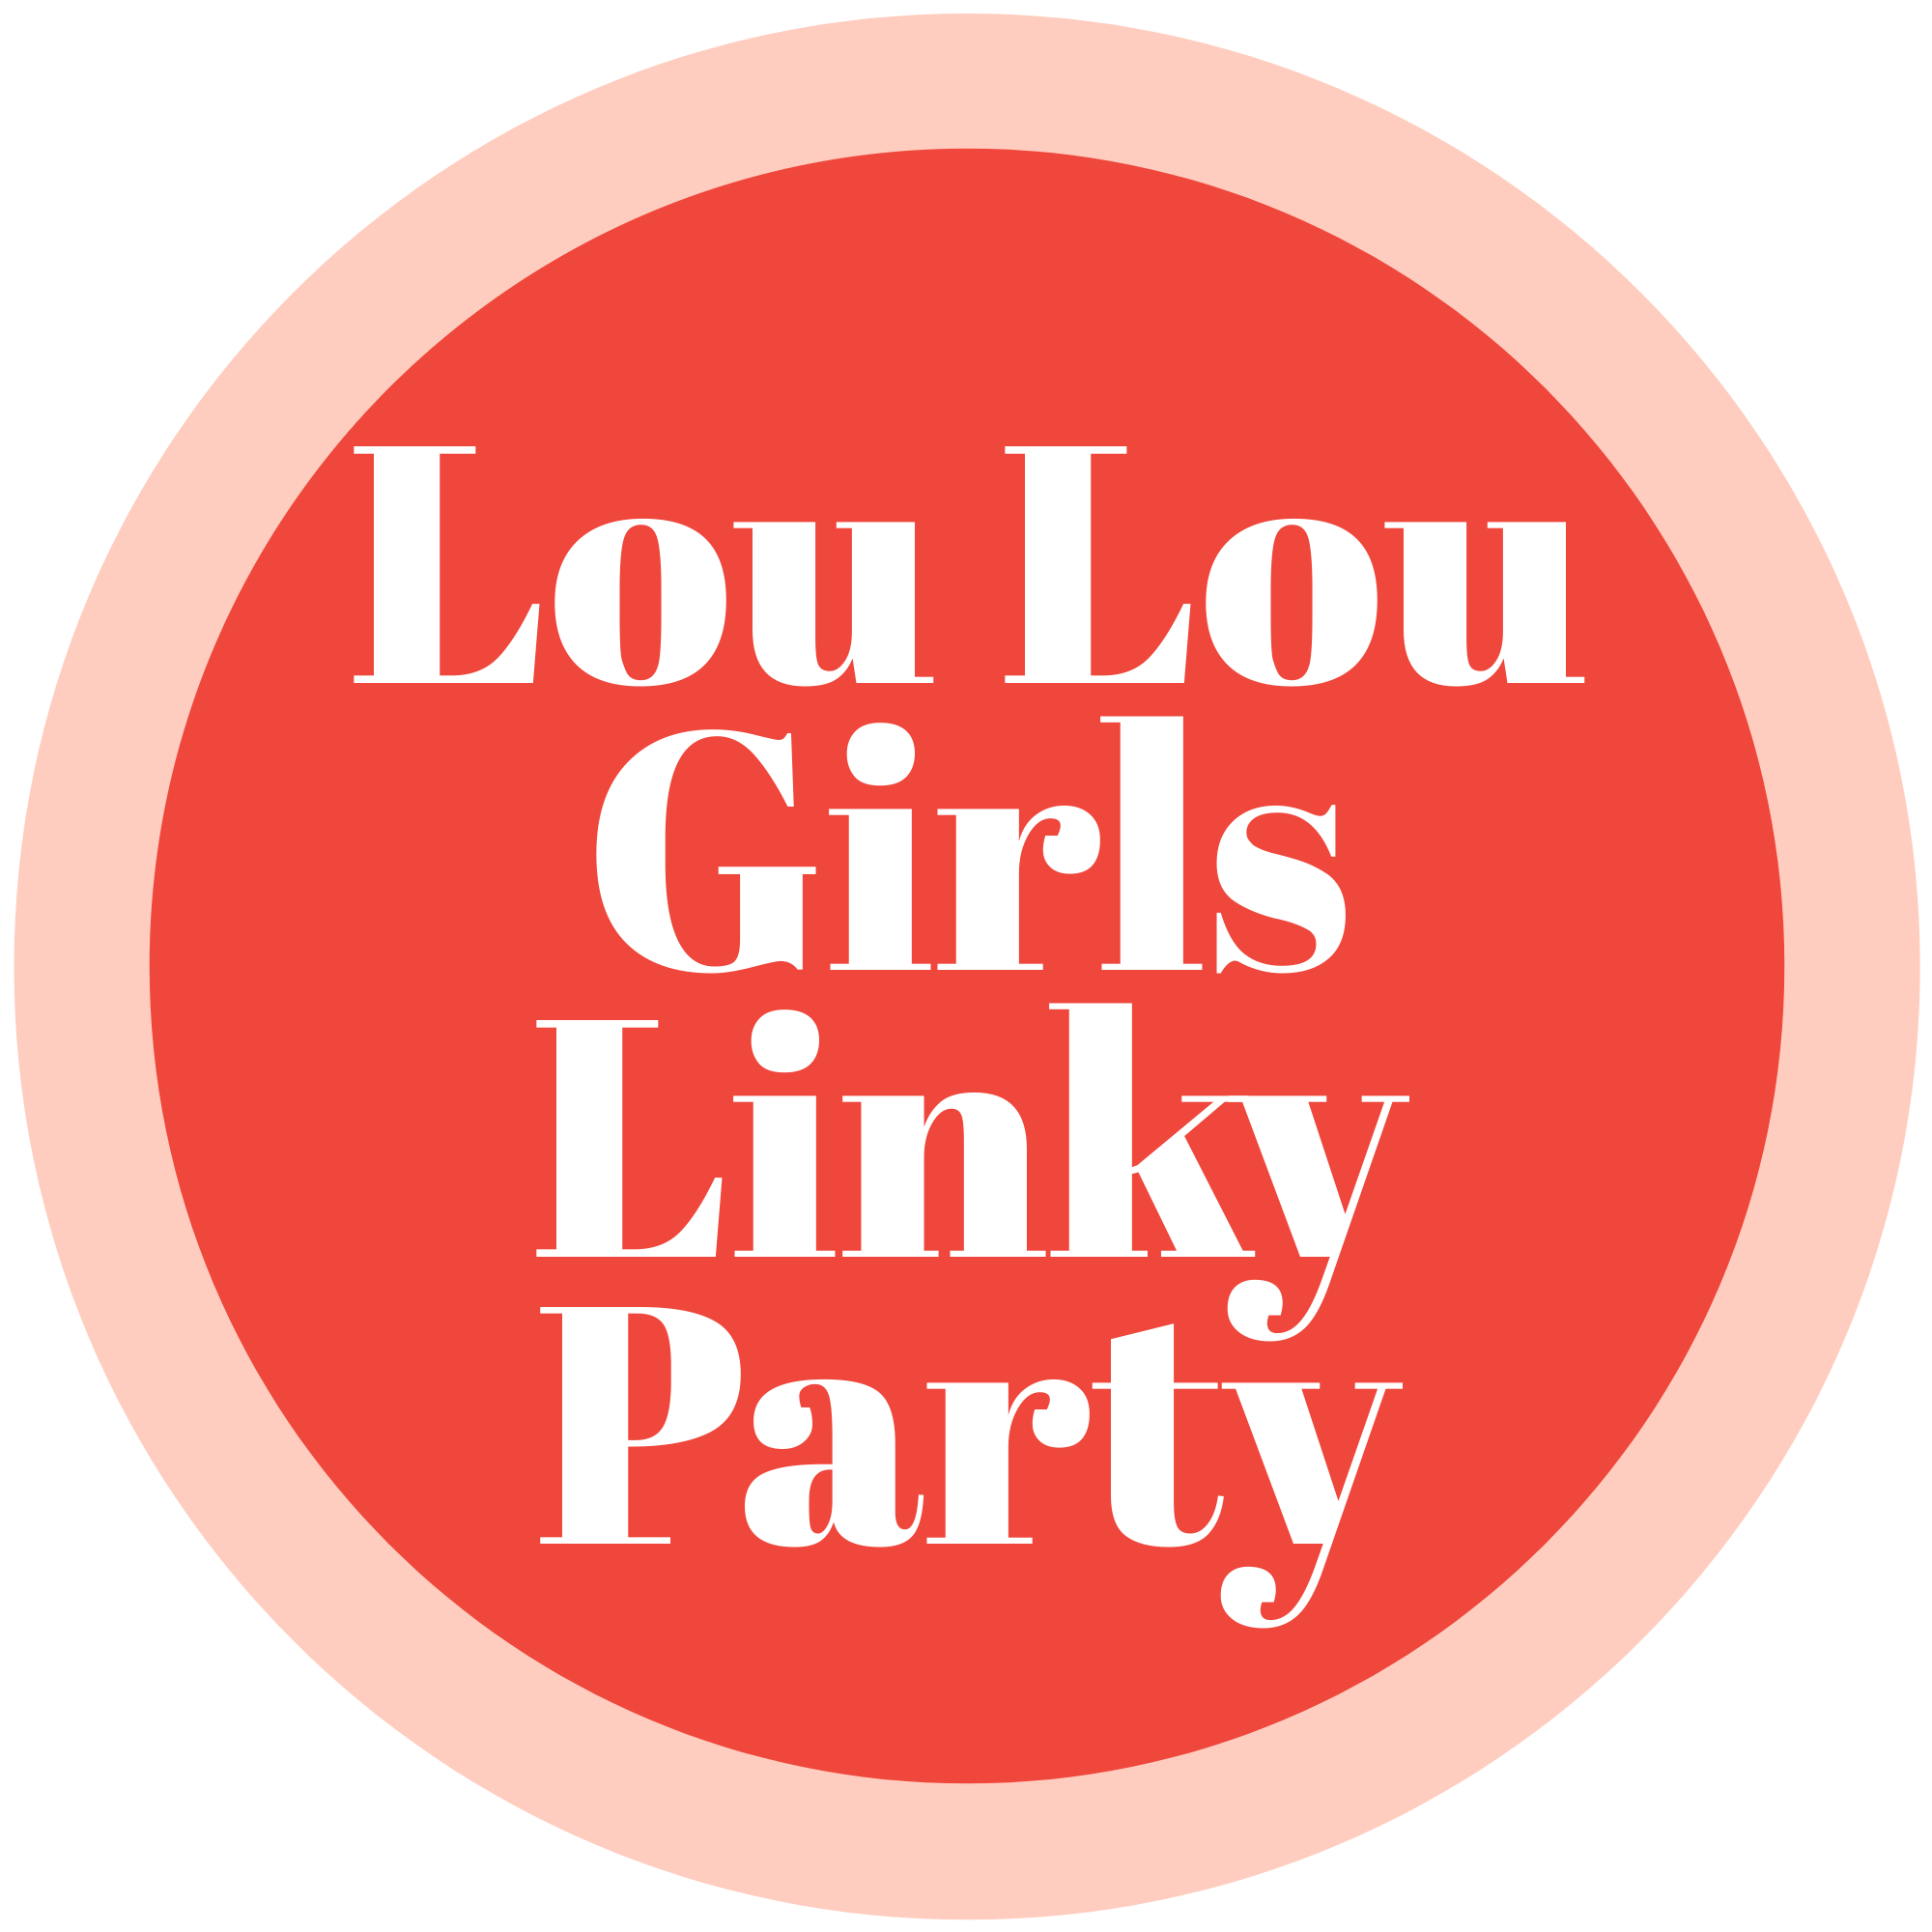 Lou Lou Girls Fabulous Party 478 #linkyparty #bloghop #linkyparties